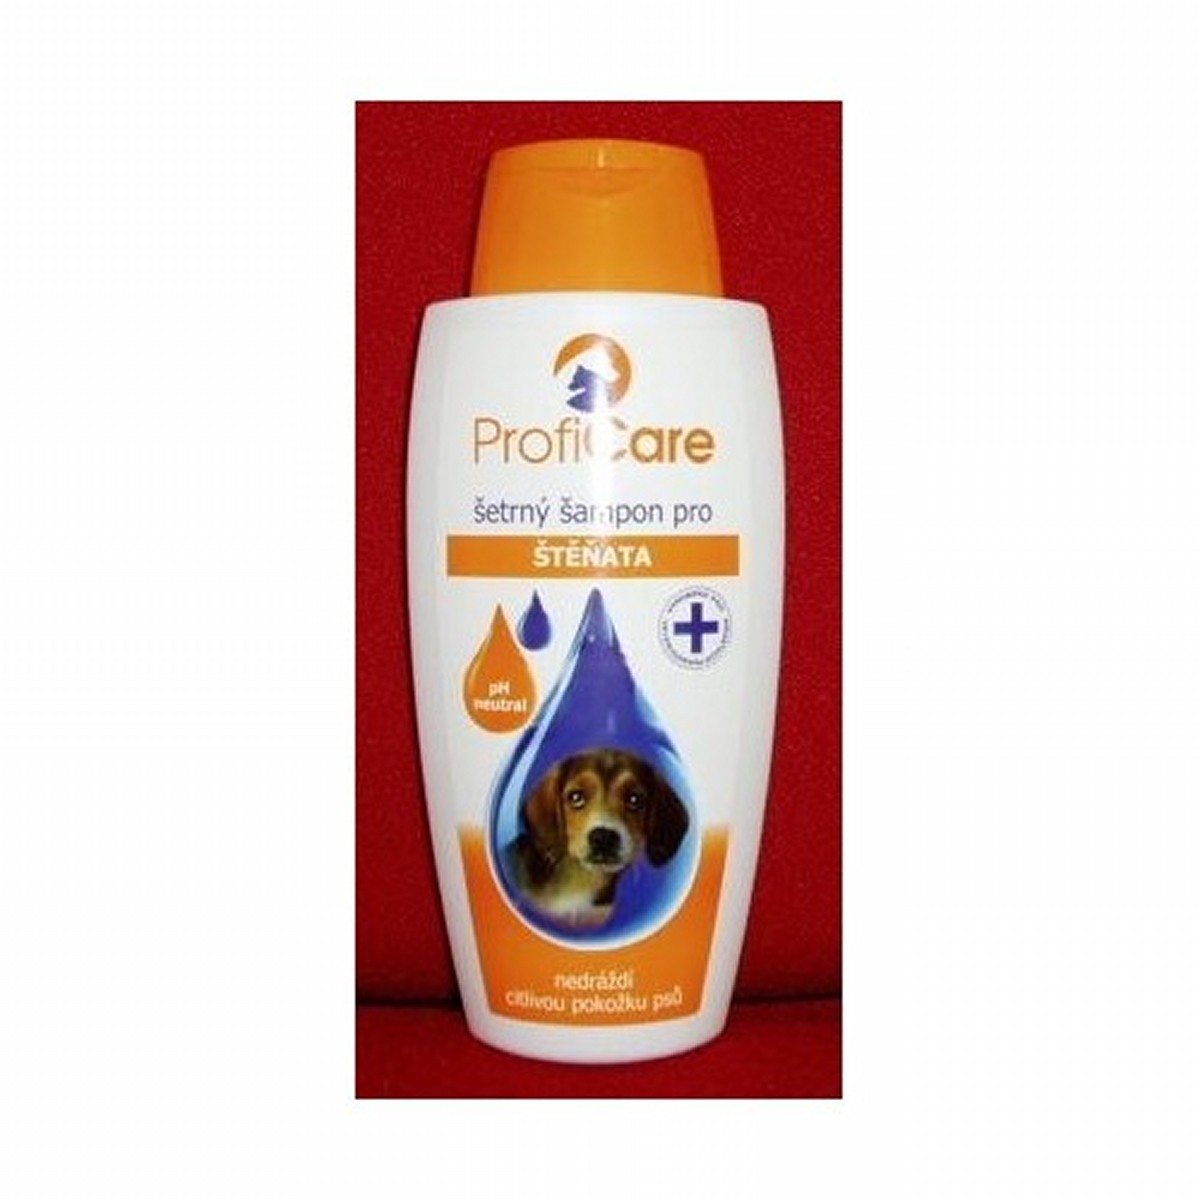 ProfiCare shampoo for puppies with mink oil 300ml